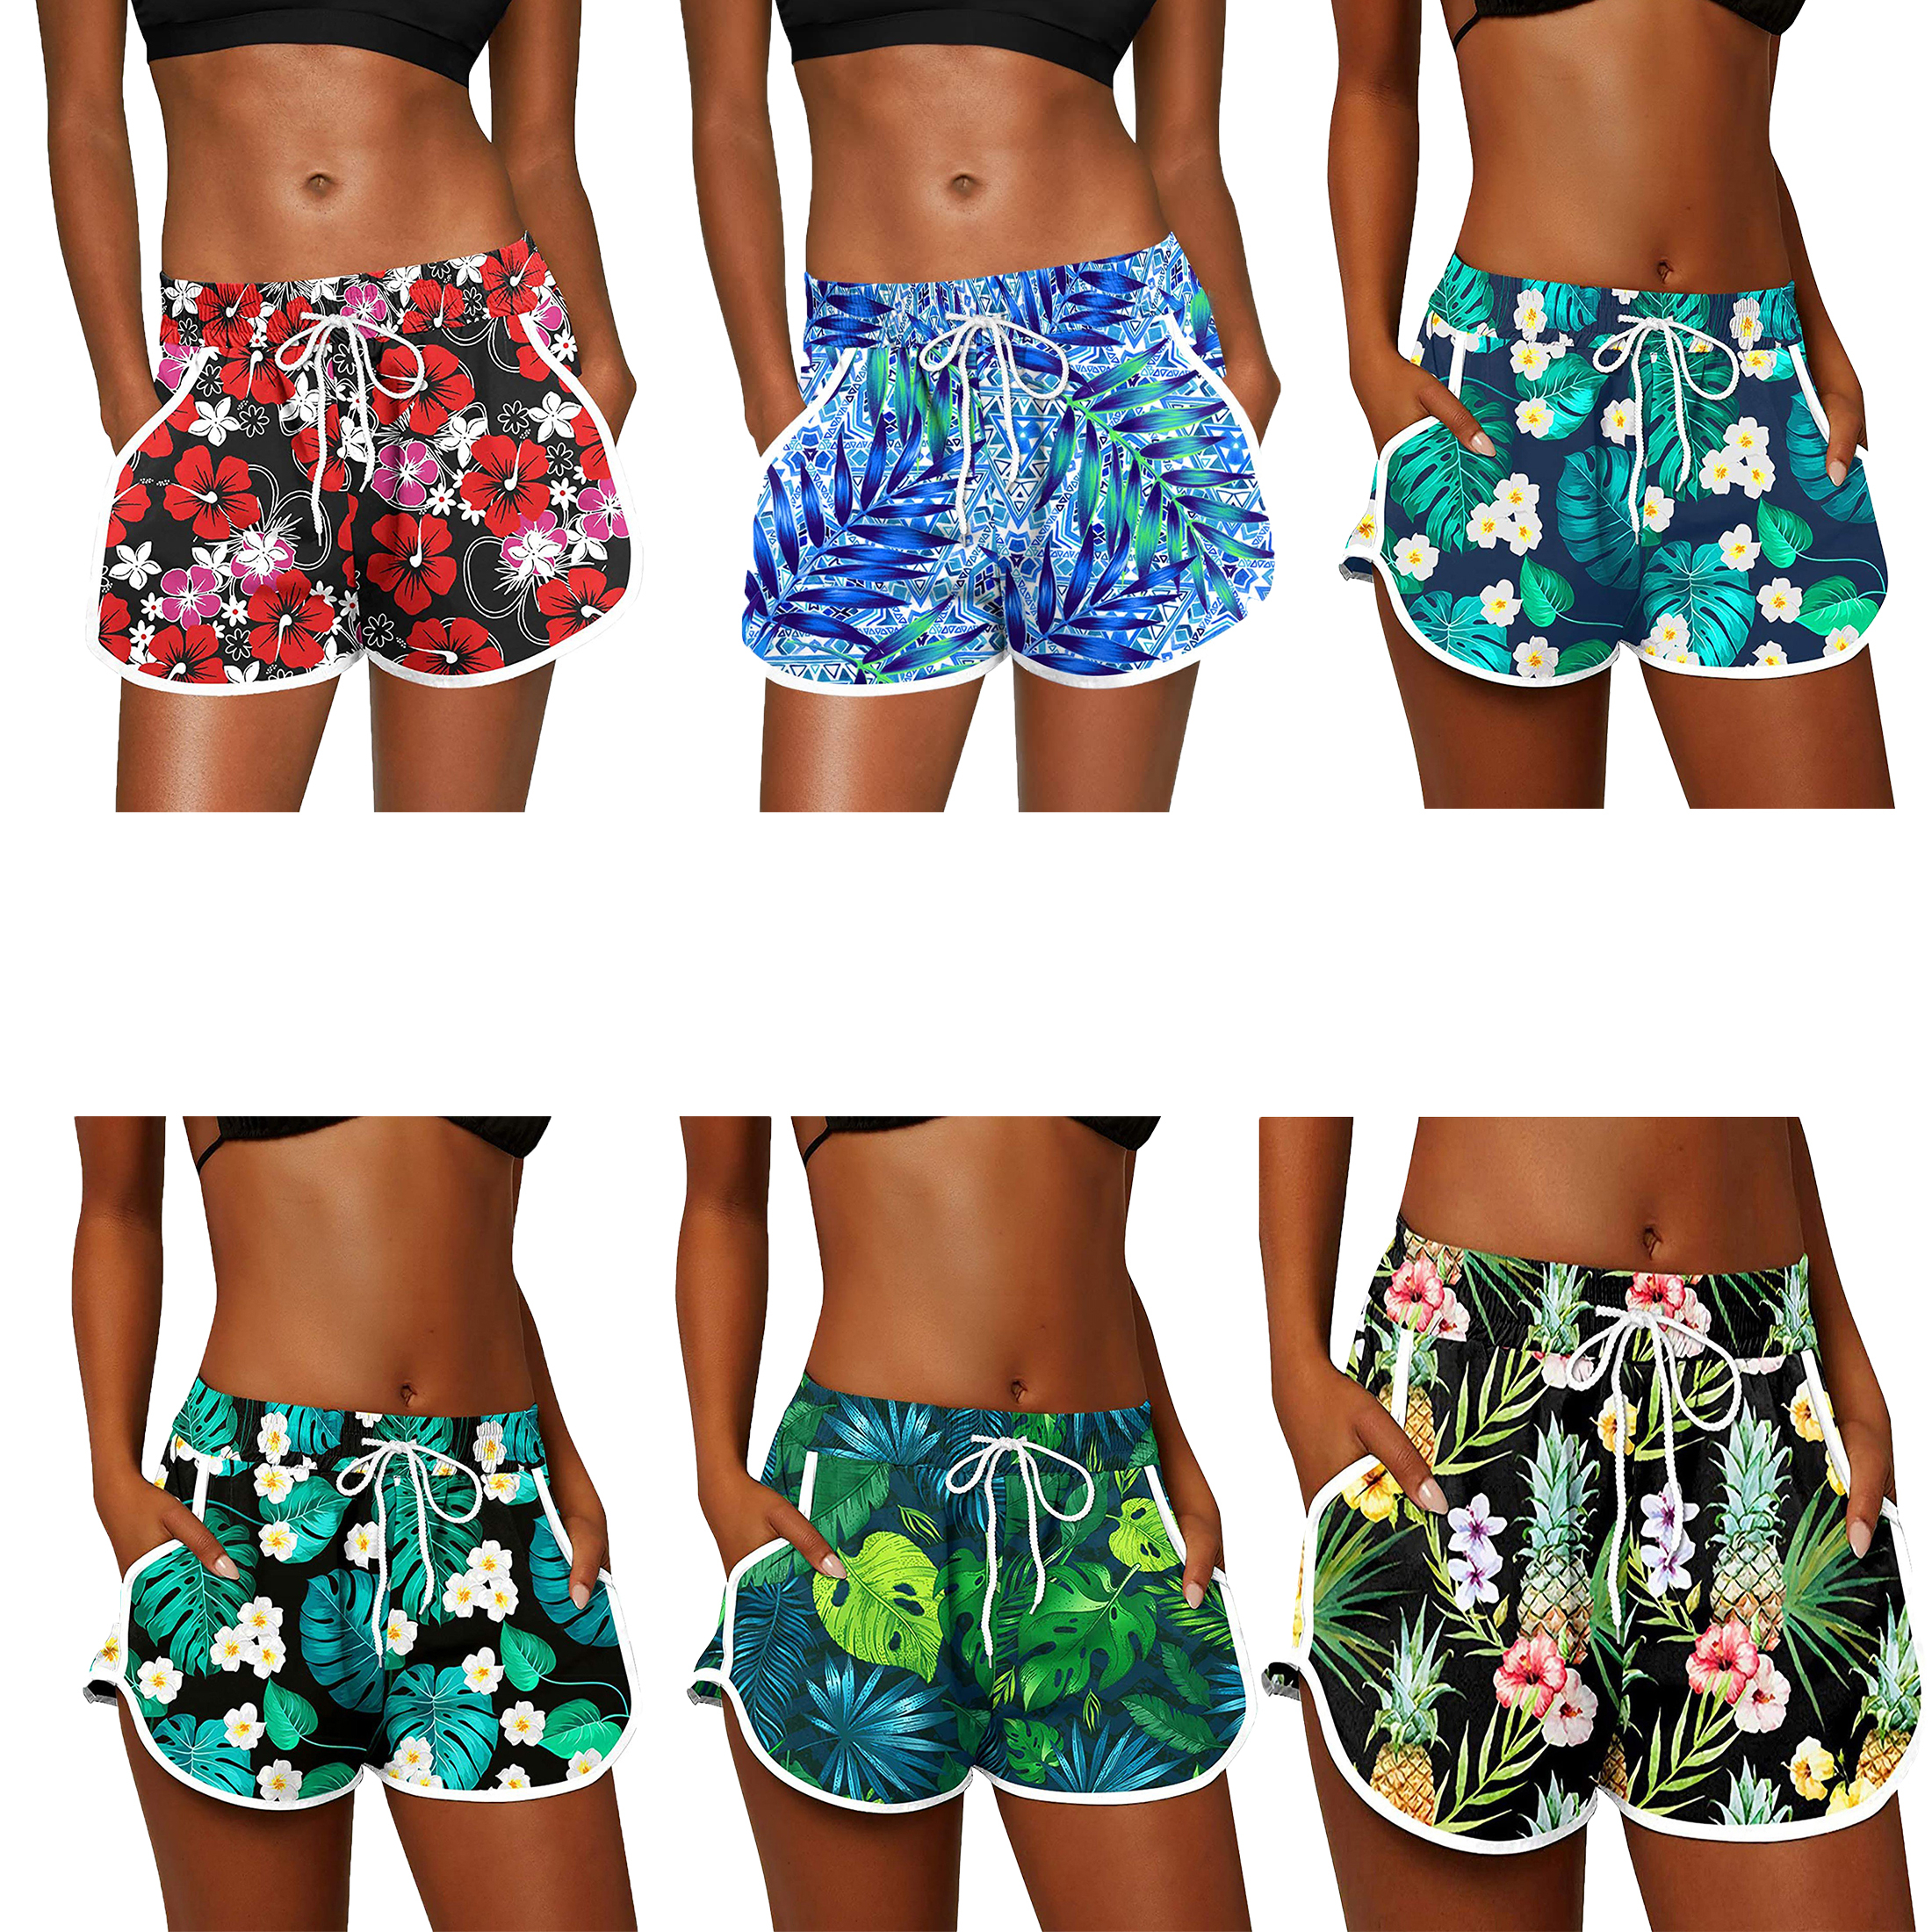 2-Pack Women's Floral Printed Shorts Elastic Waist Drawstring Summer Lounge Wear Pants Casual Dolphin Shorts With Pockets Quick Dry - S